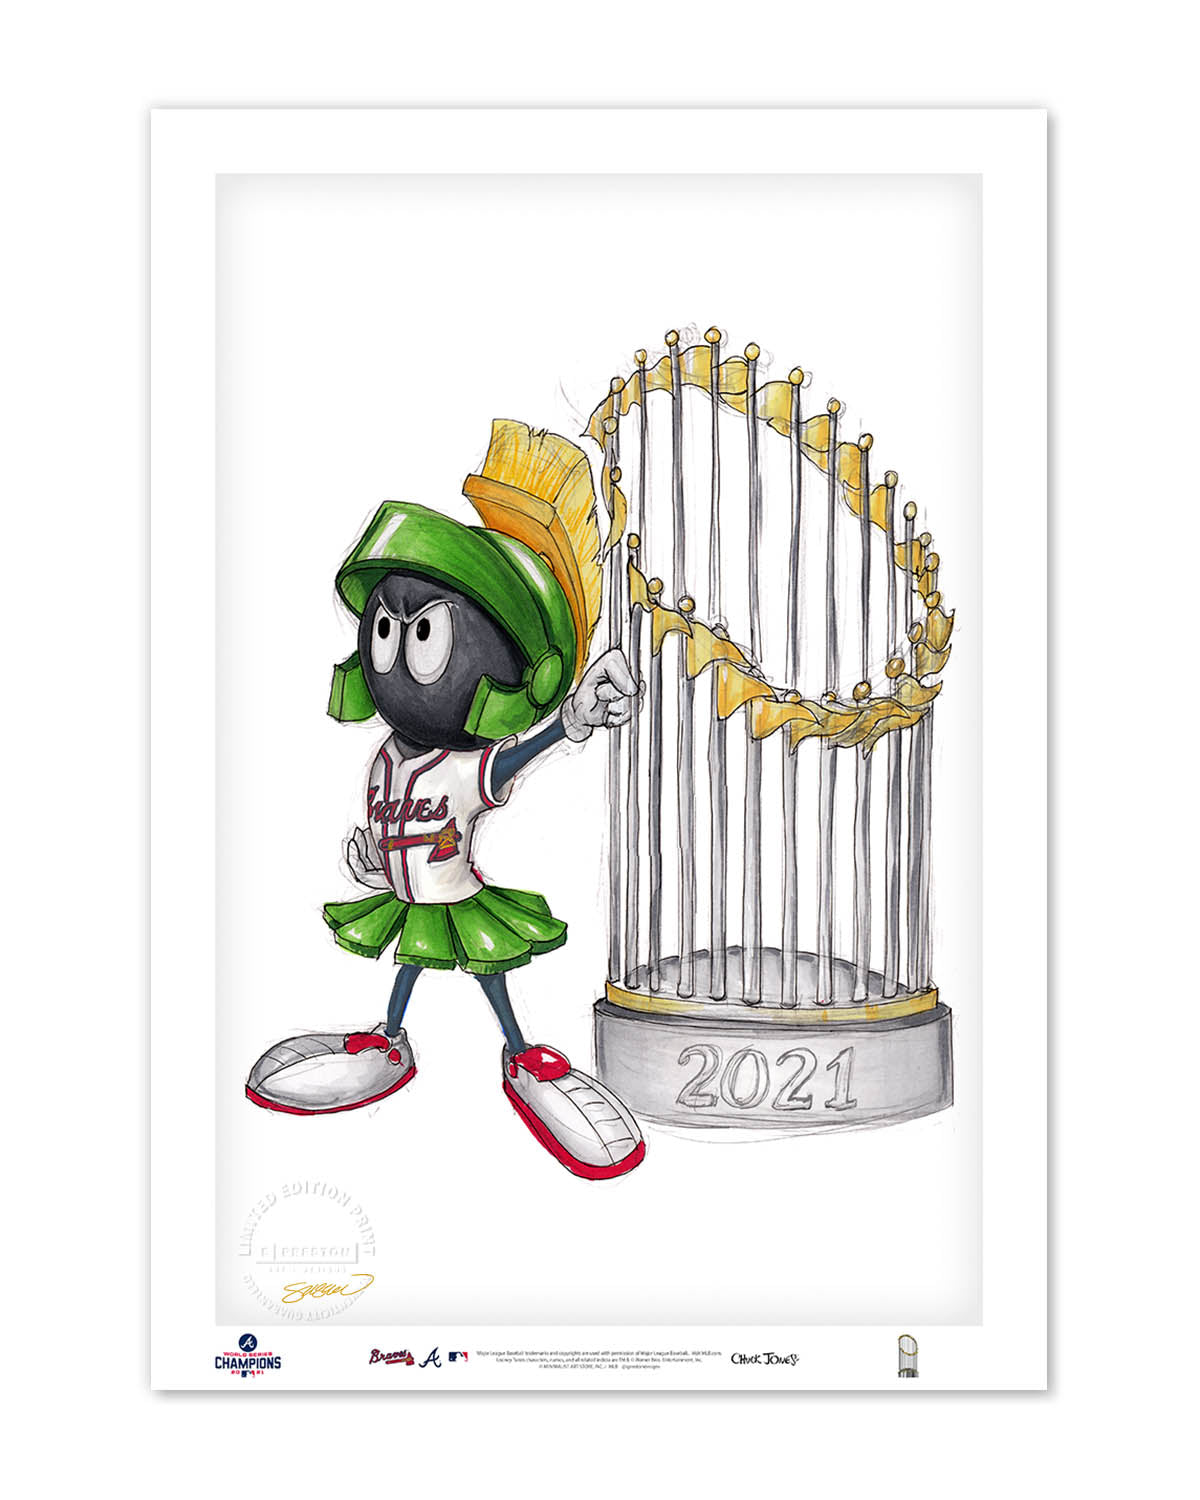 World Series Marvin The Martian 2021 Limited Edition Fine Art Print